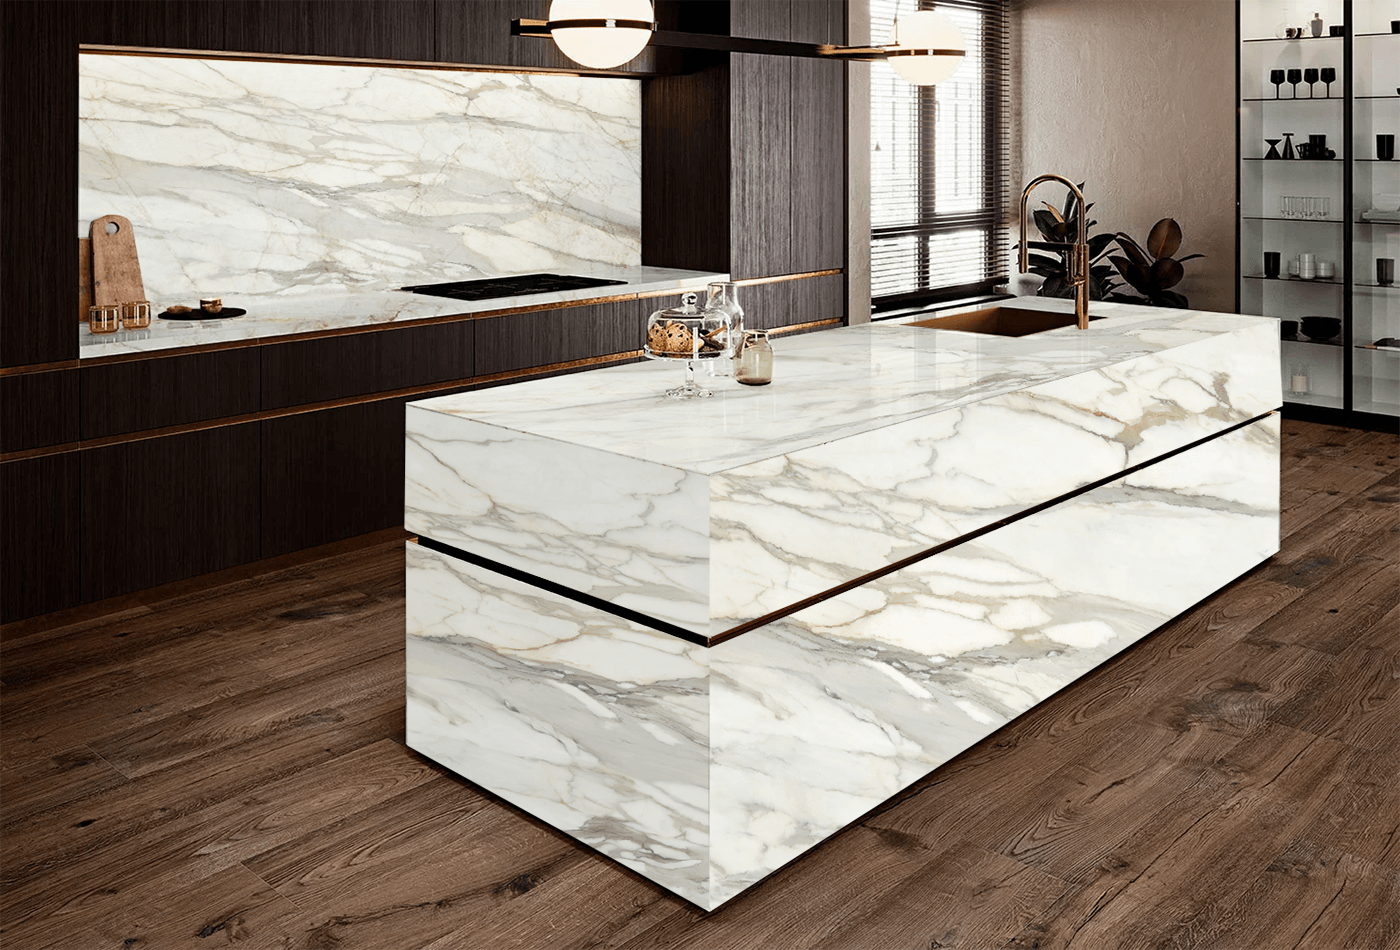 Porcelain Kitchen Guide for your Floor and Countertop